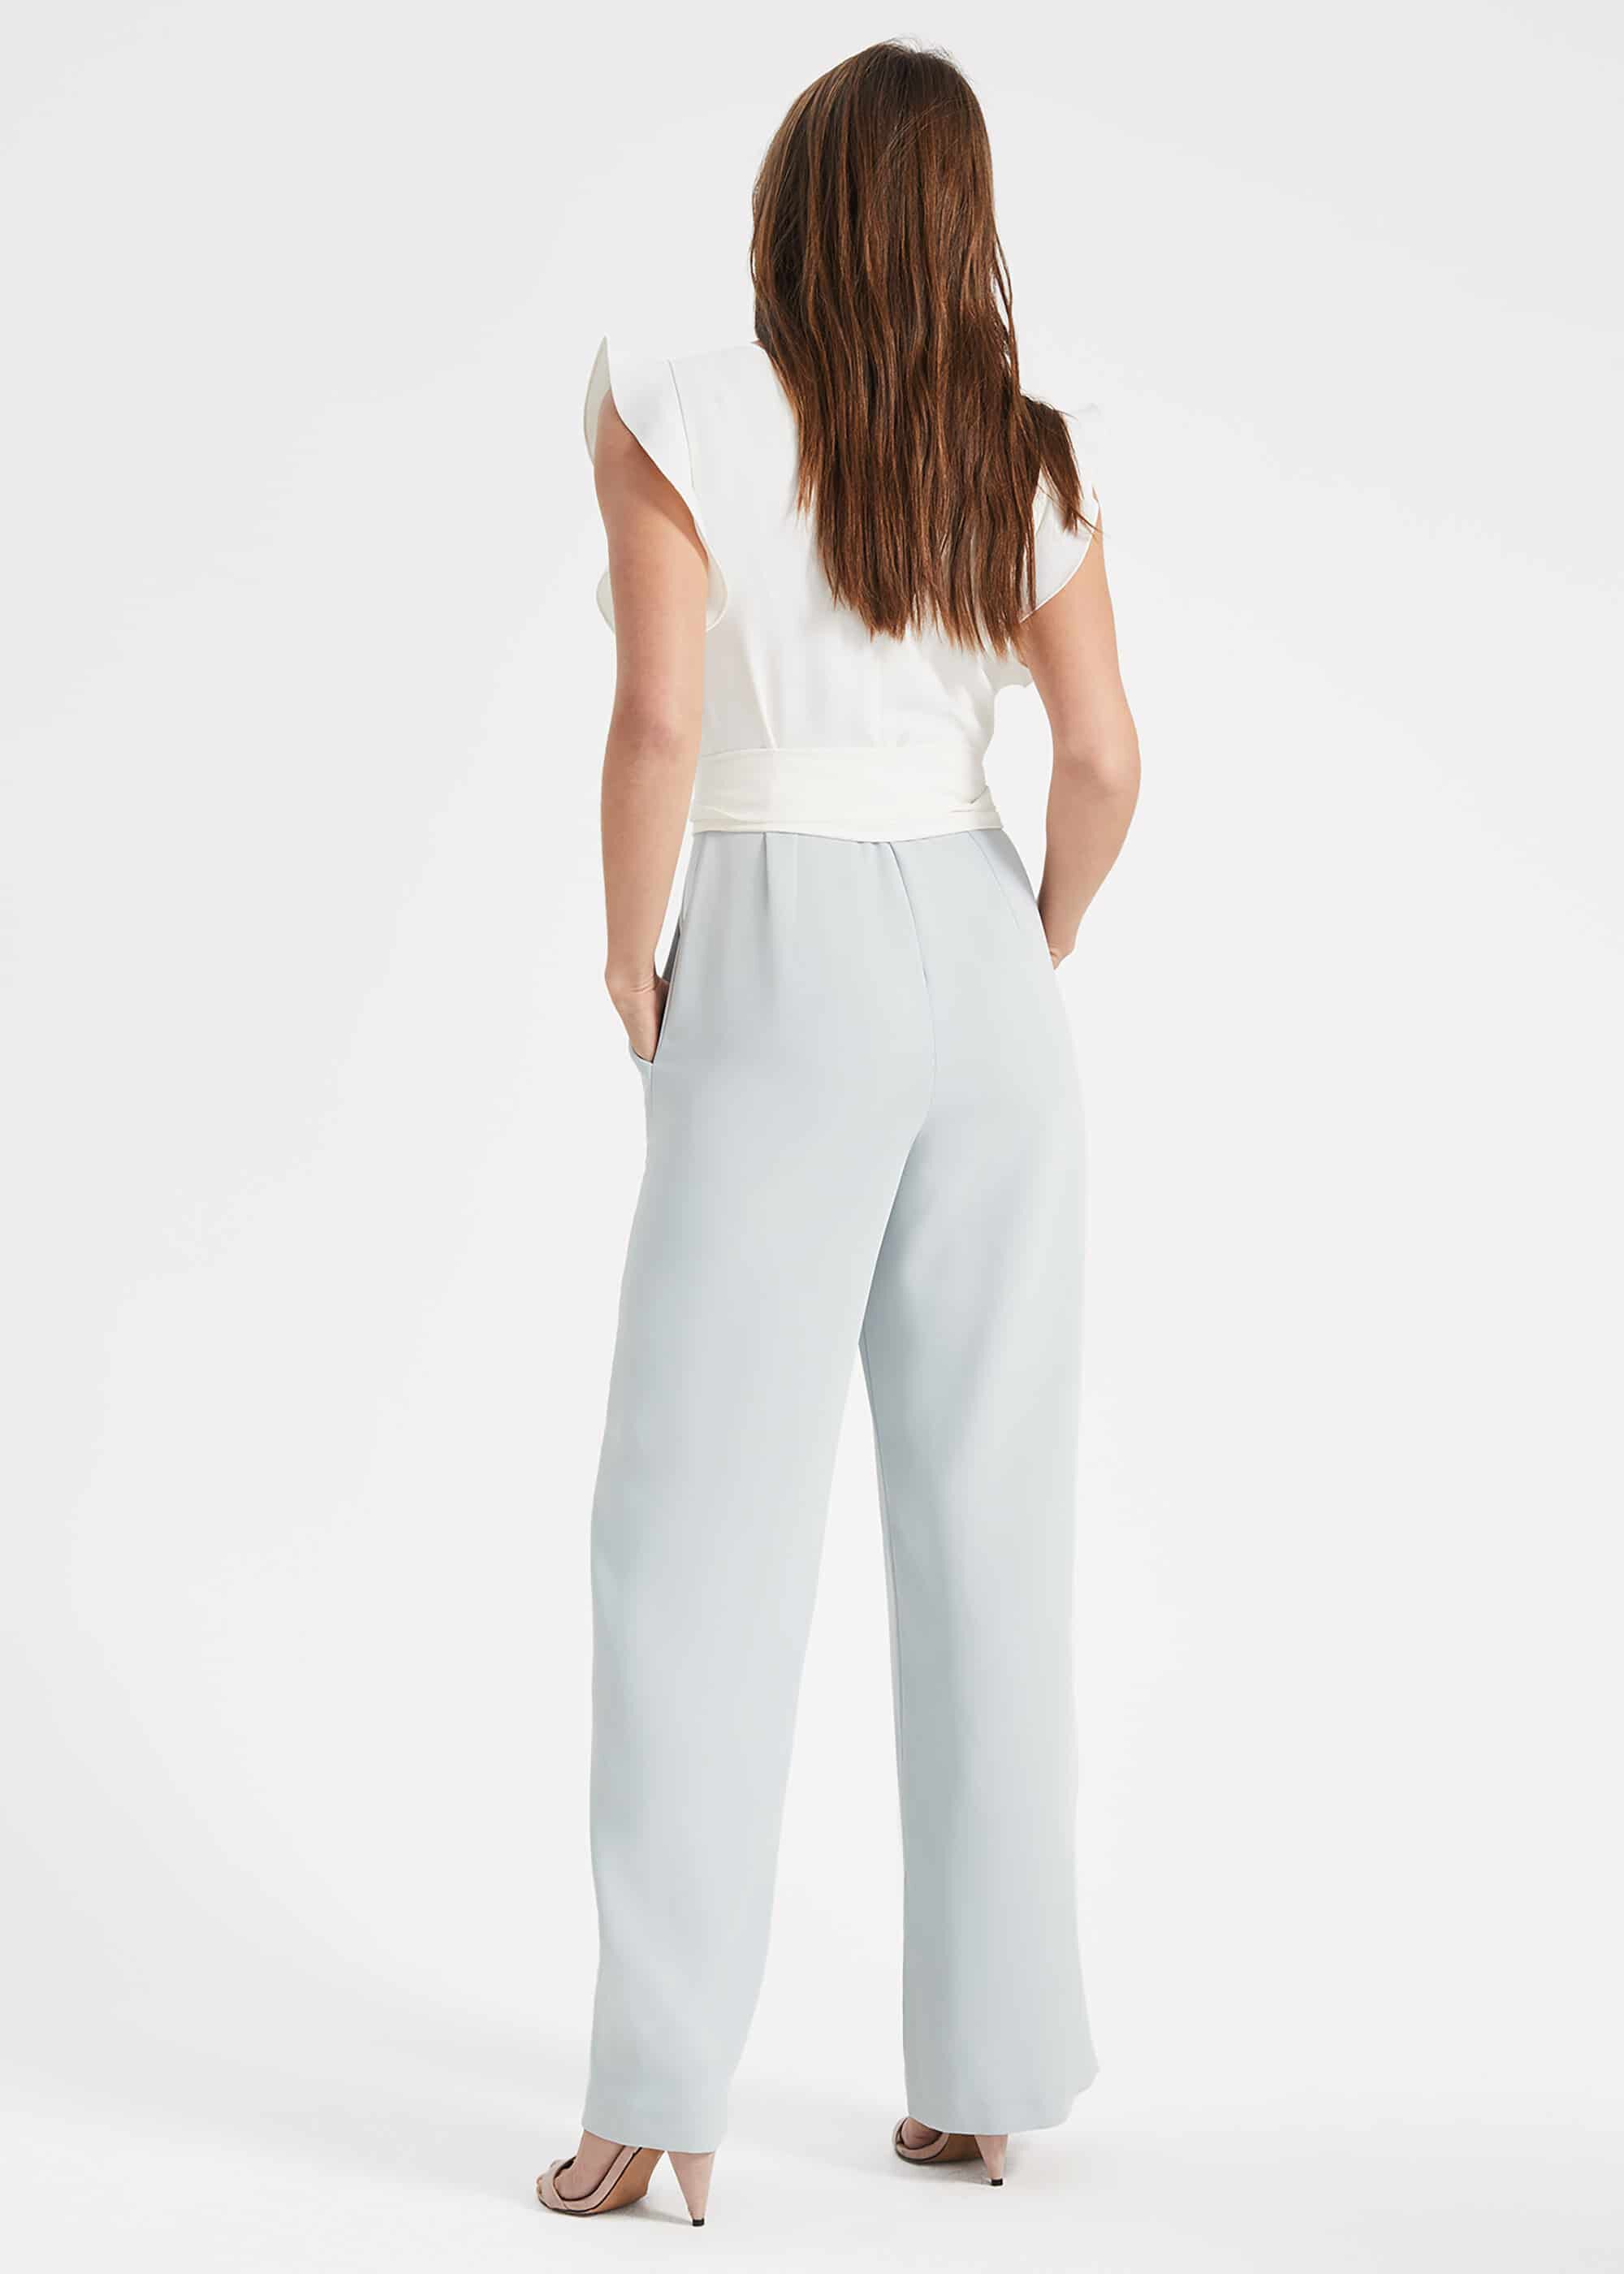 phase eight duck egg jumpsuit